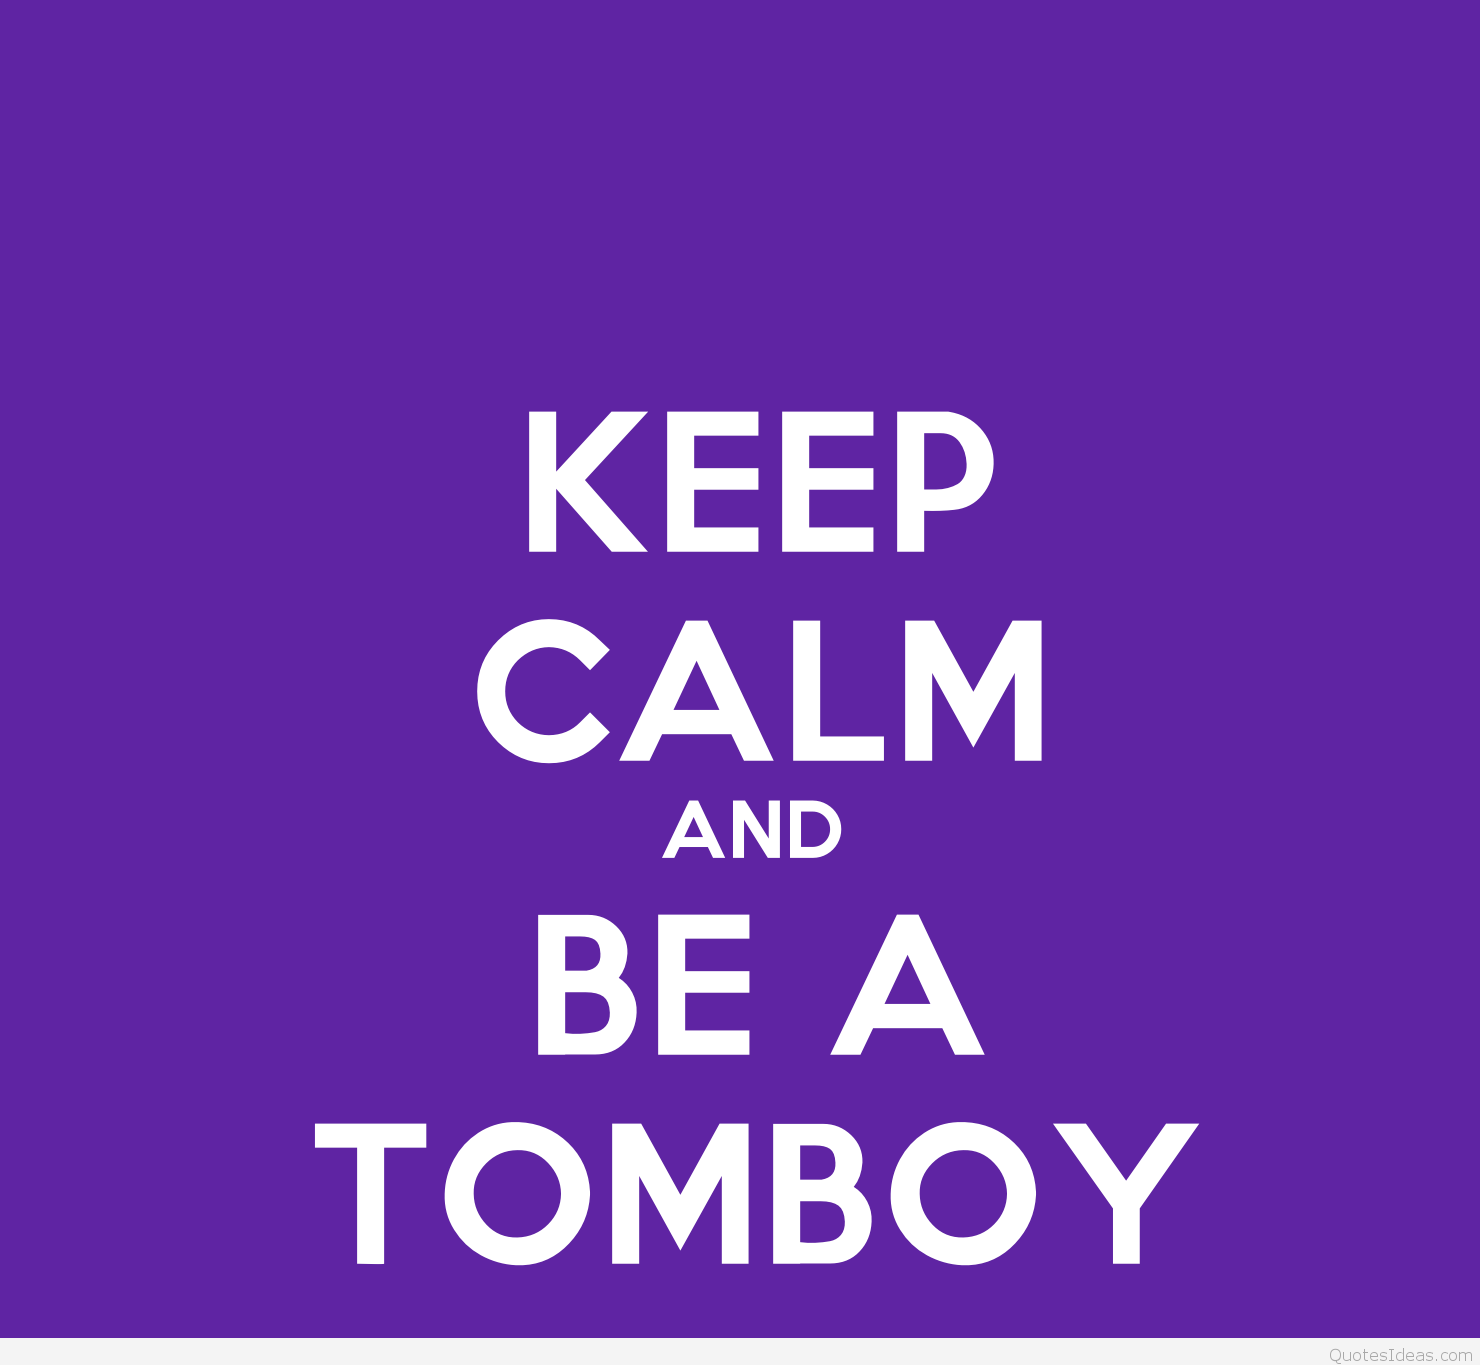 Download tomboy backgrounds Bhmpics